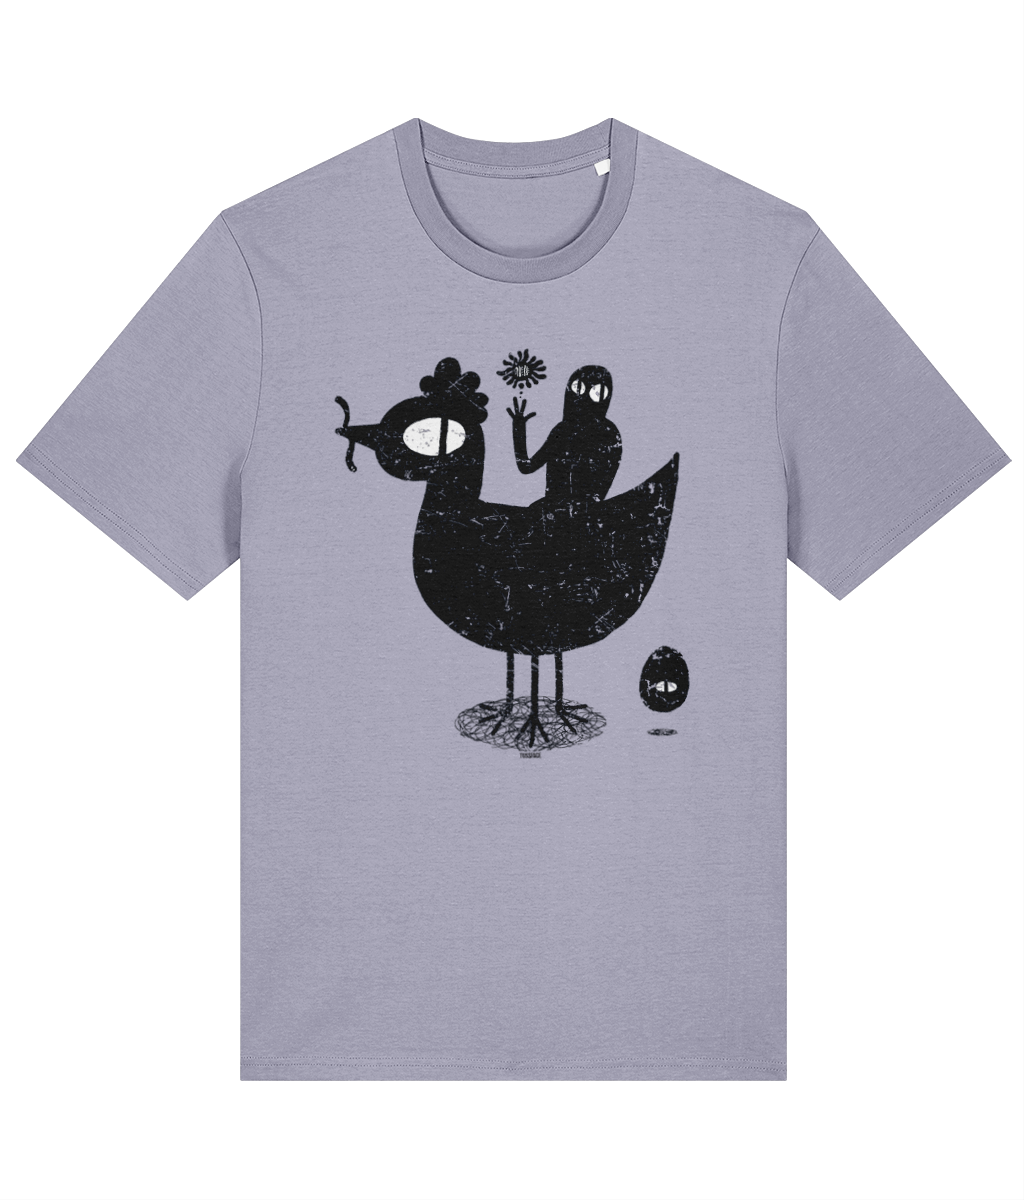 WELCOME THE EGGMAN - We Are Bl1p T-shirt by Tussface